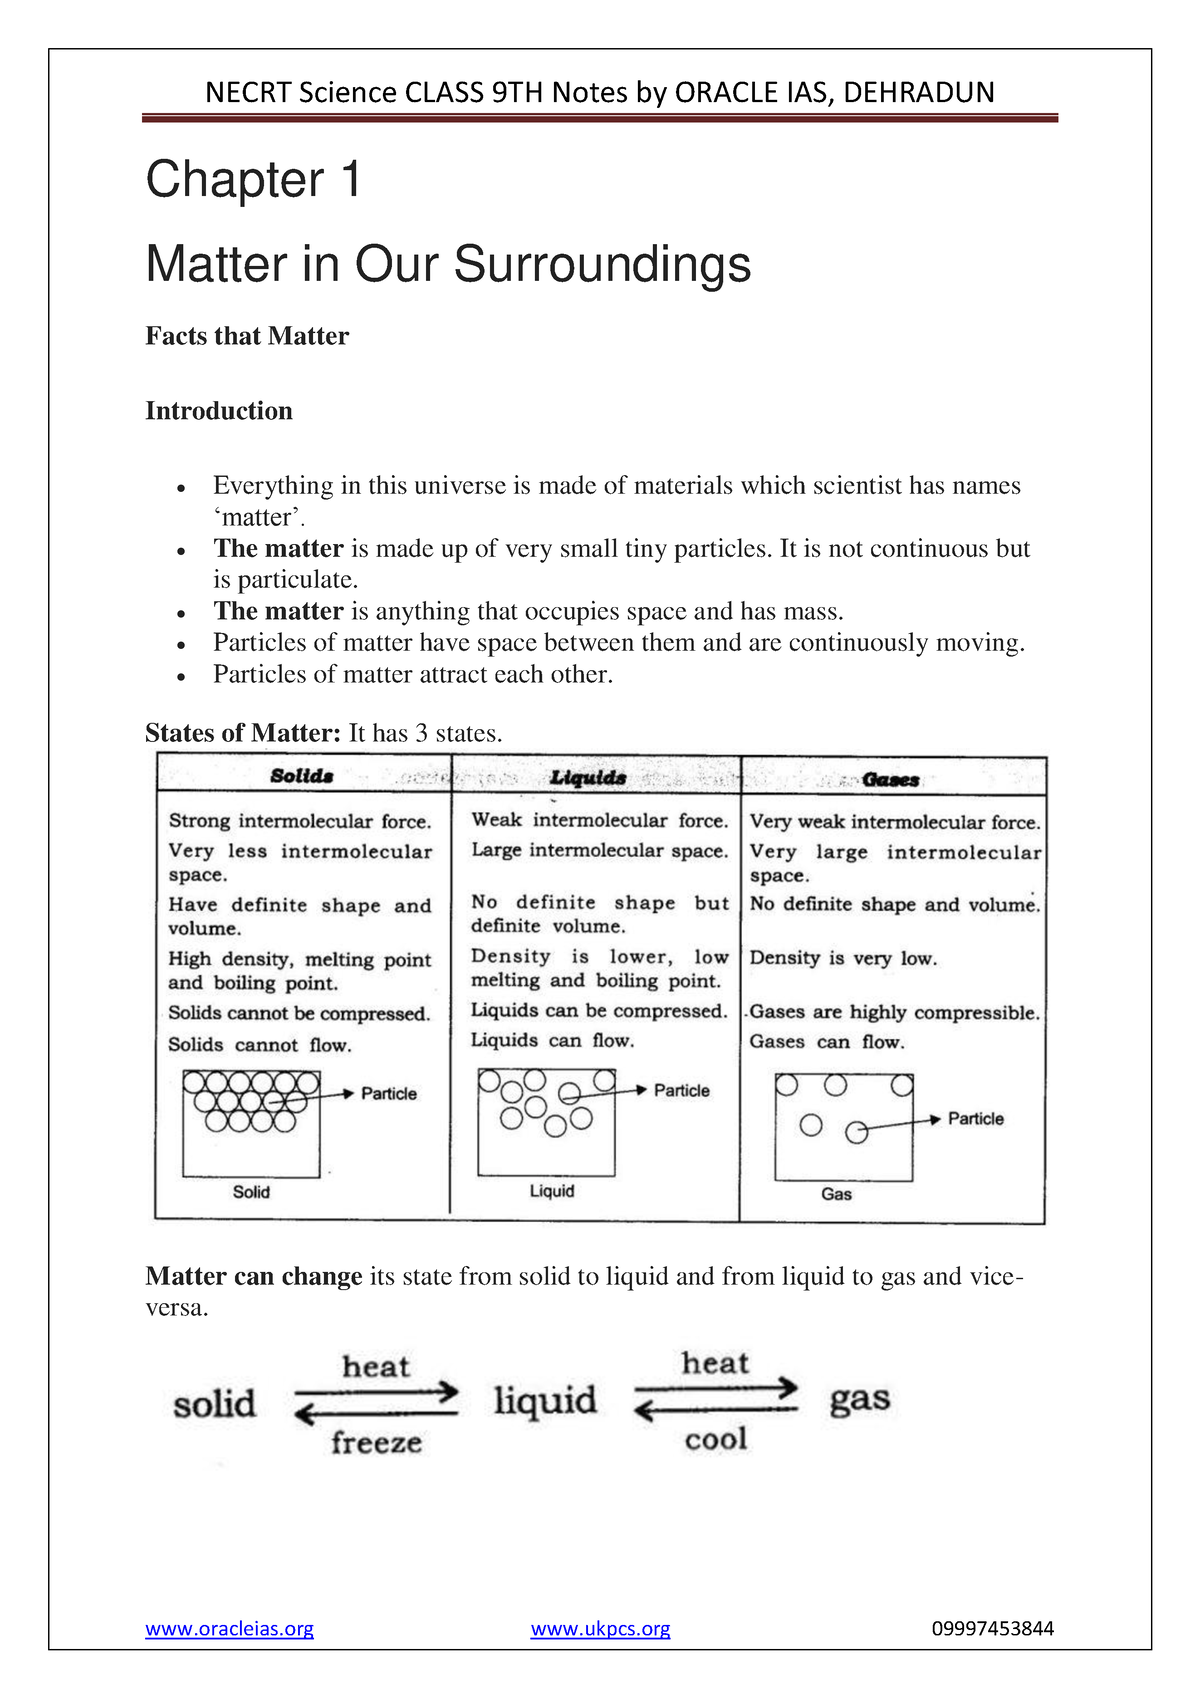 Ncert-class 9 science summary - Chapter 1 Matter in Our Surroundings ...